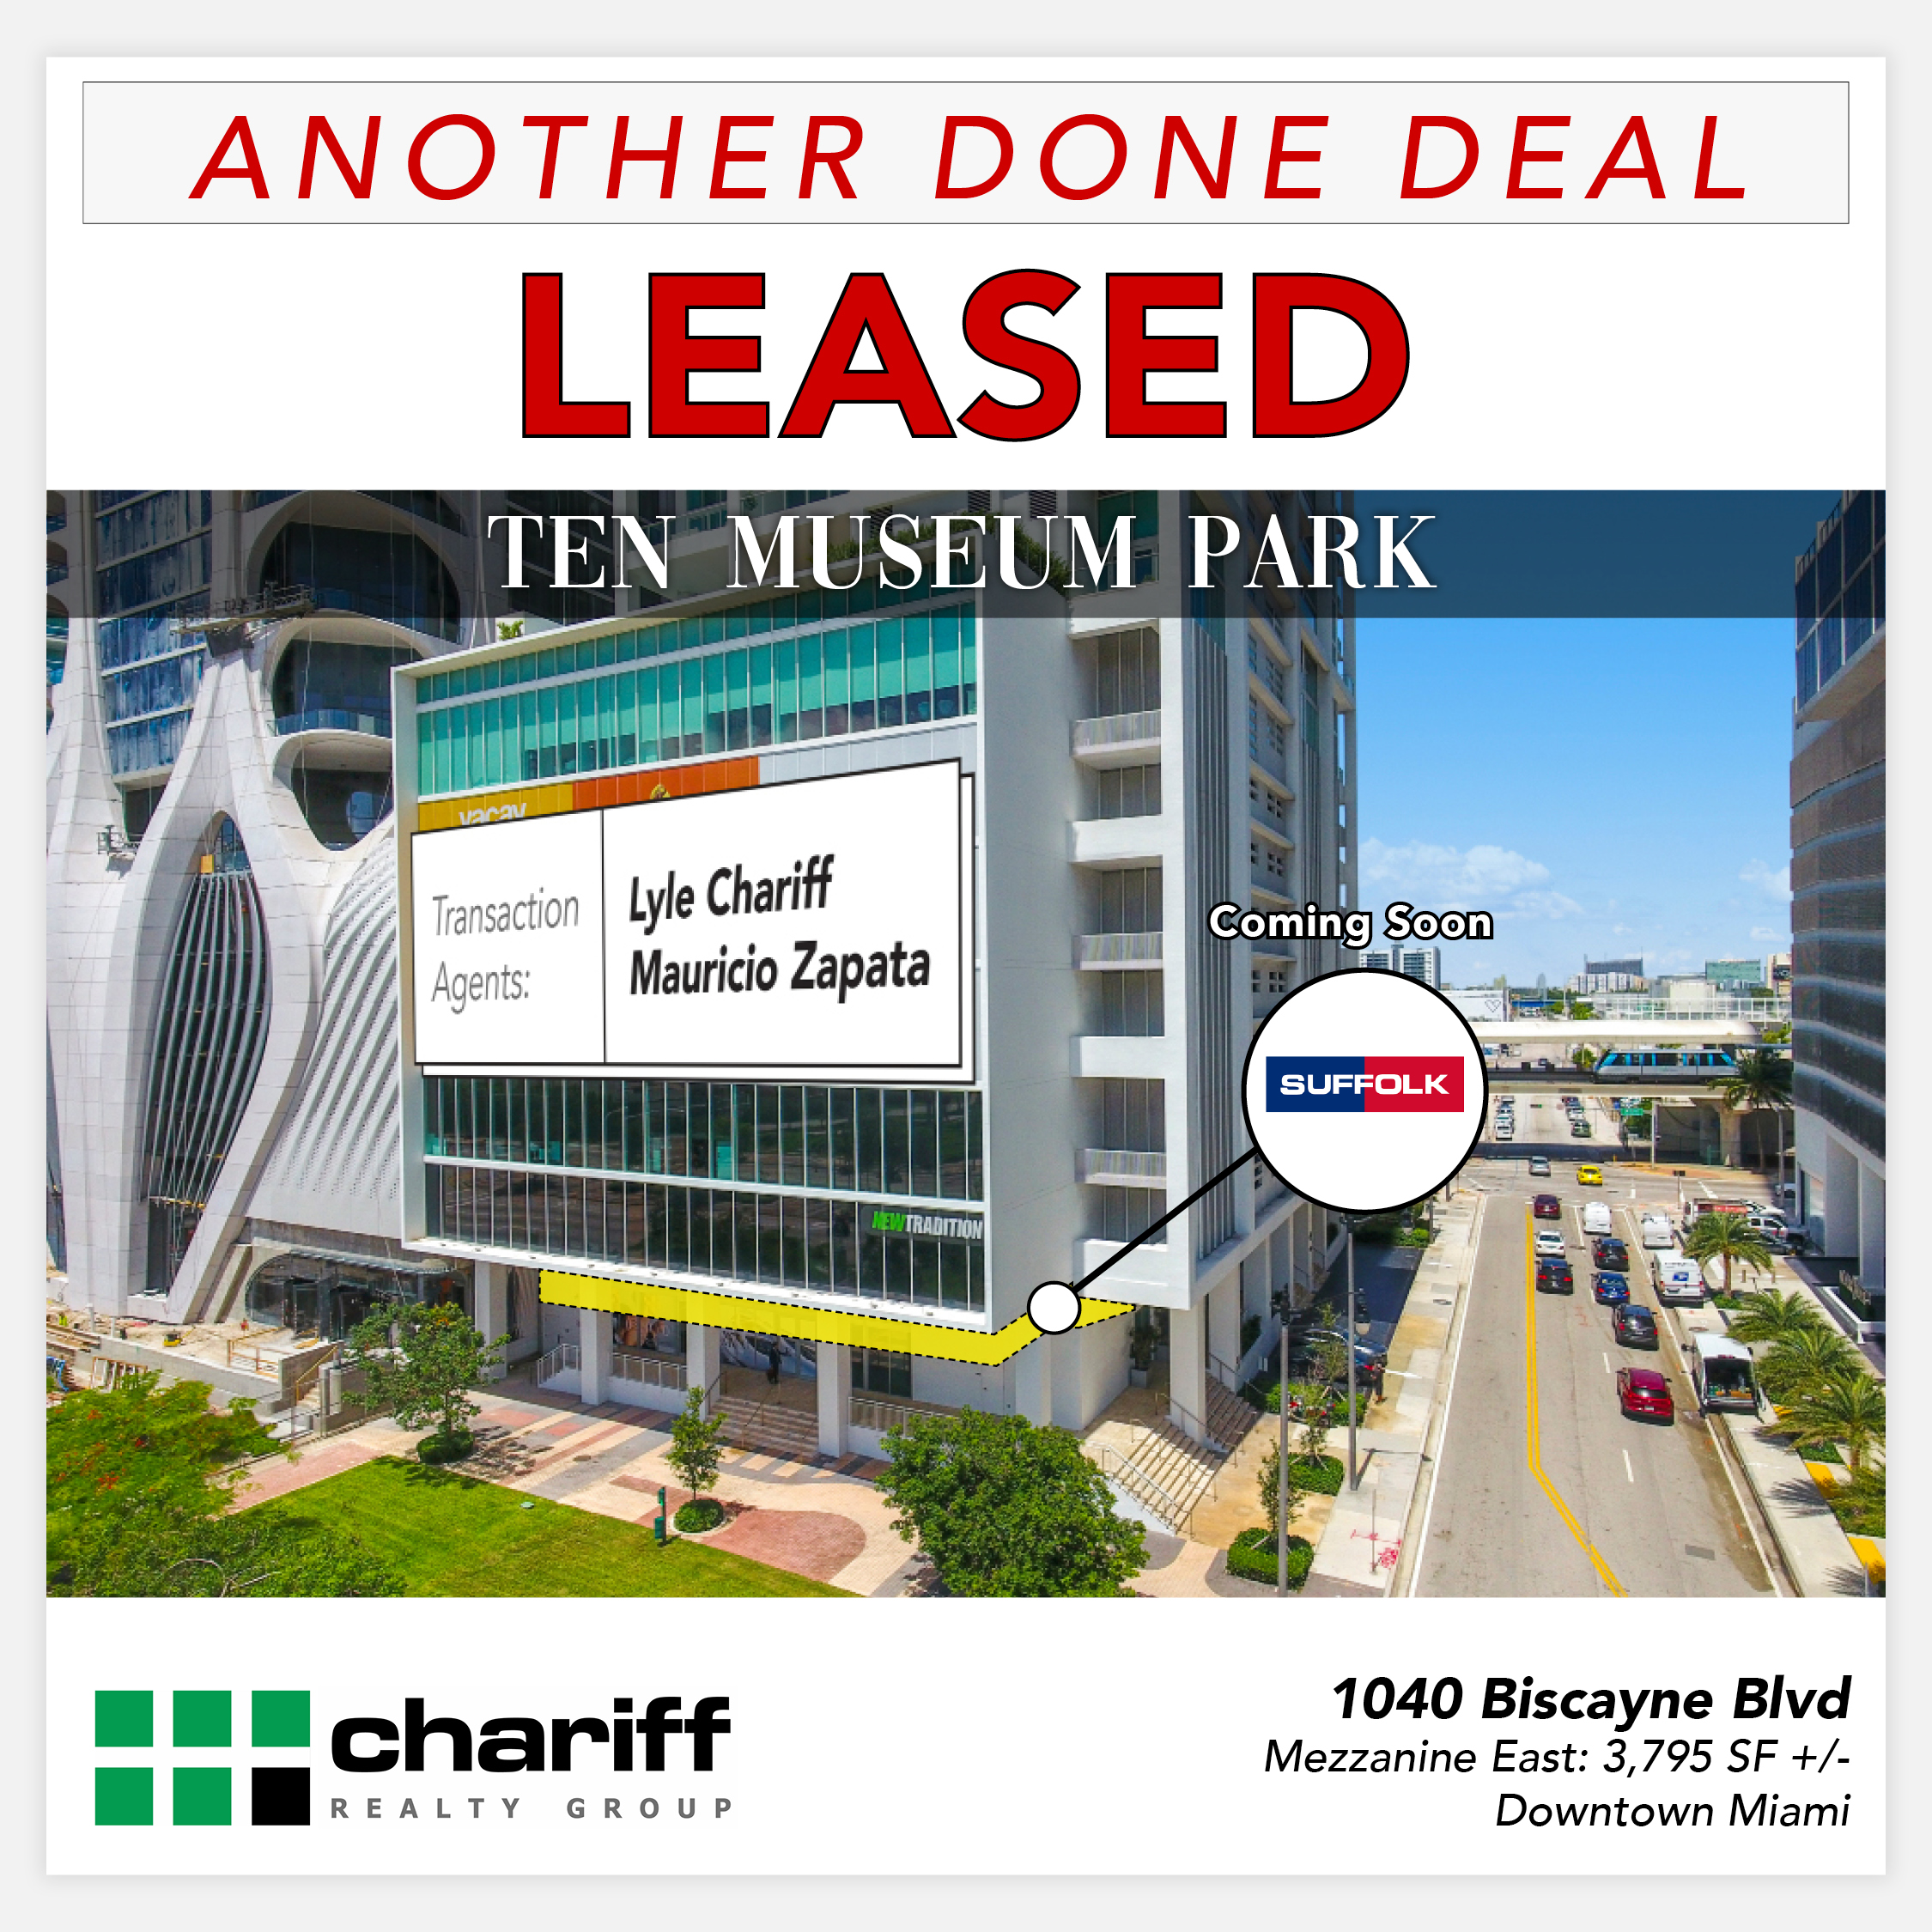 1040 Biscayne Blvd - Another Done Deal - Leased - Downtown Miami - Miami-Florida-33132-Chariff Realty Group